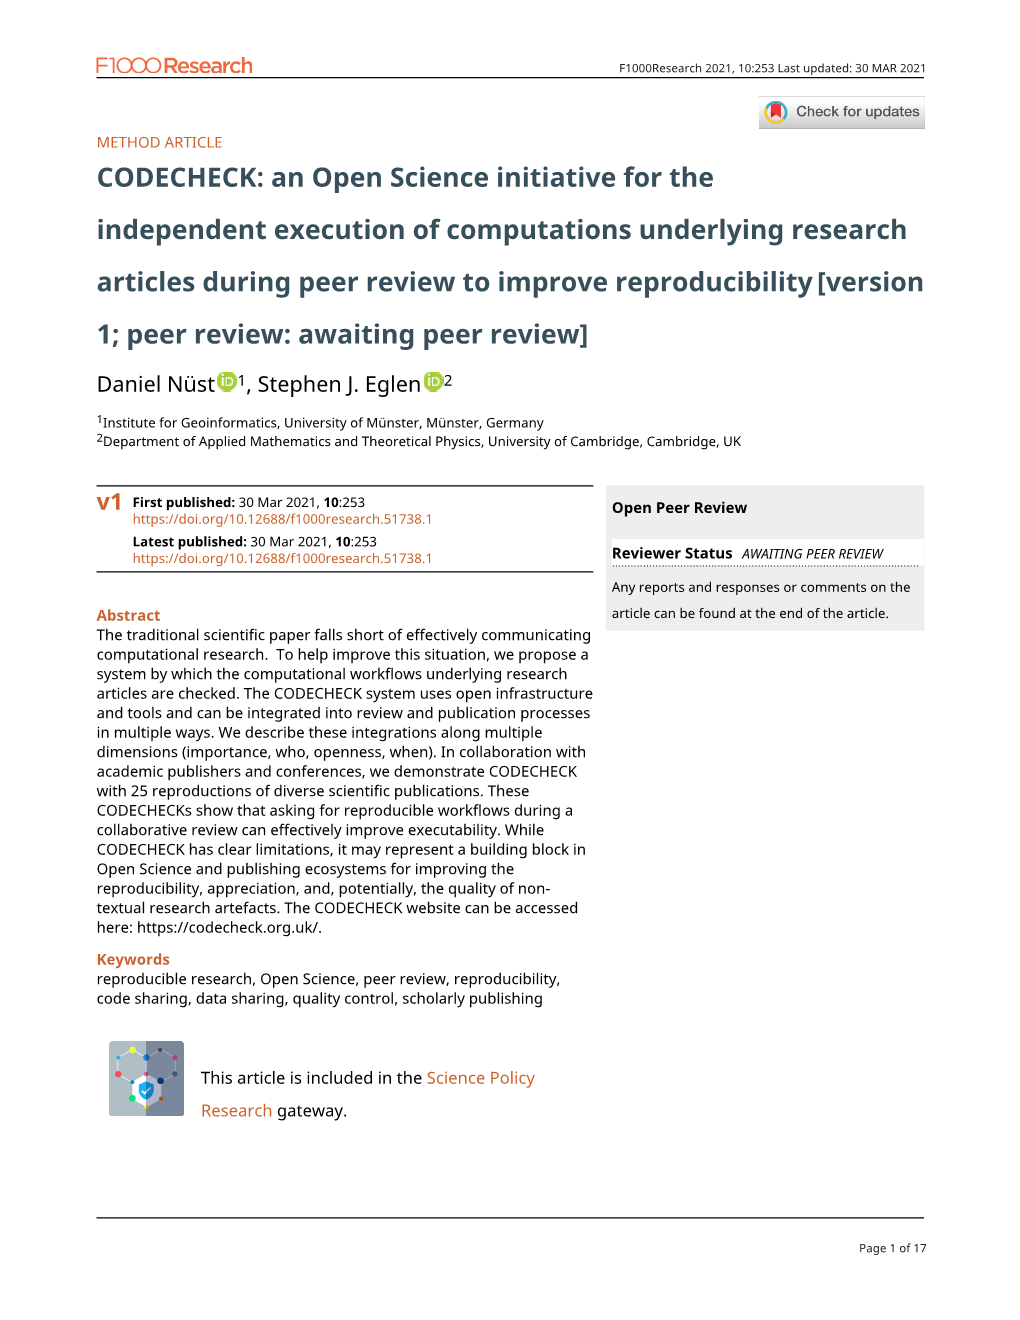 CODECHECK: an Open Science Initiative For